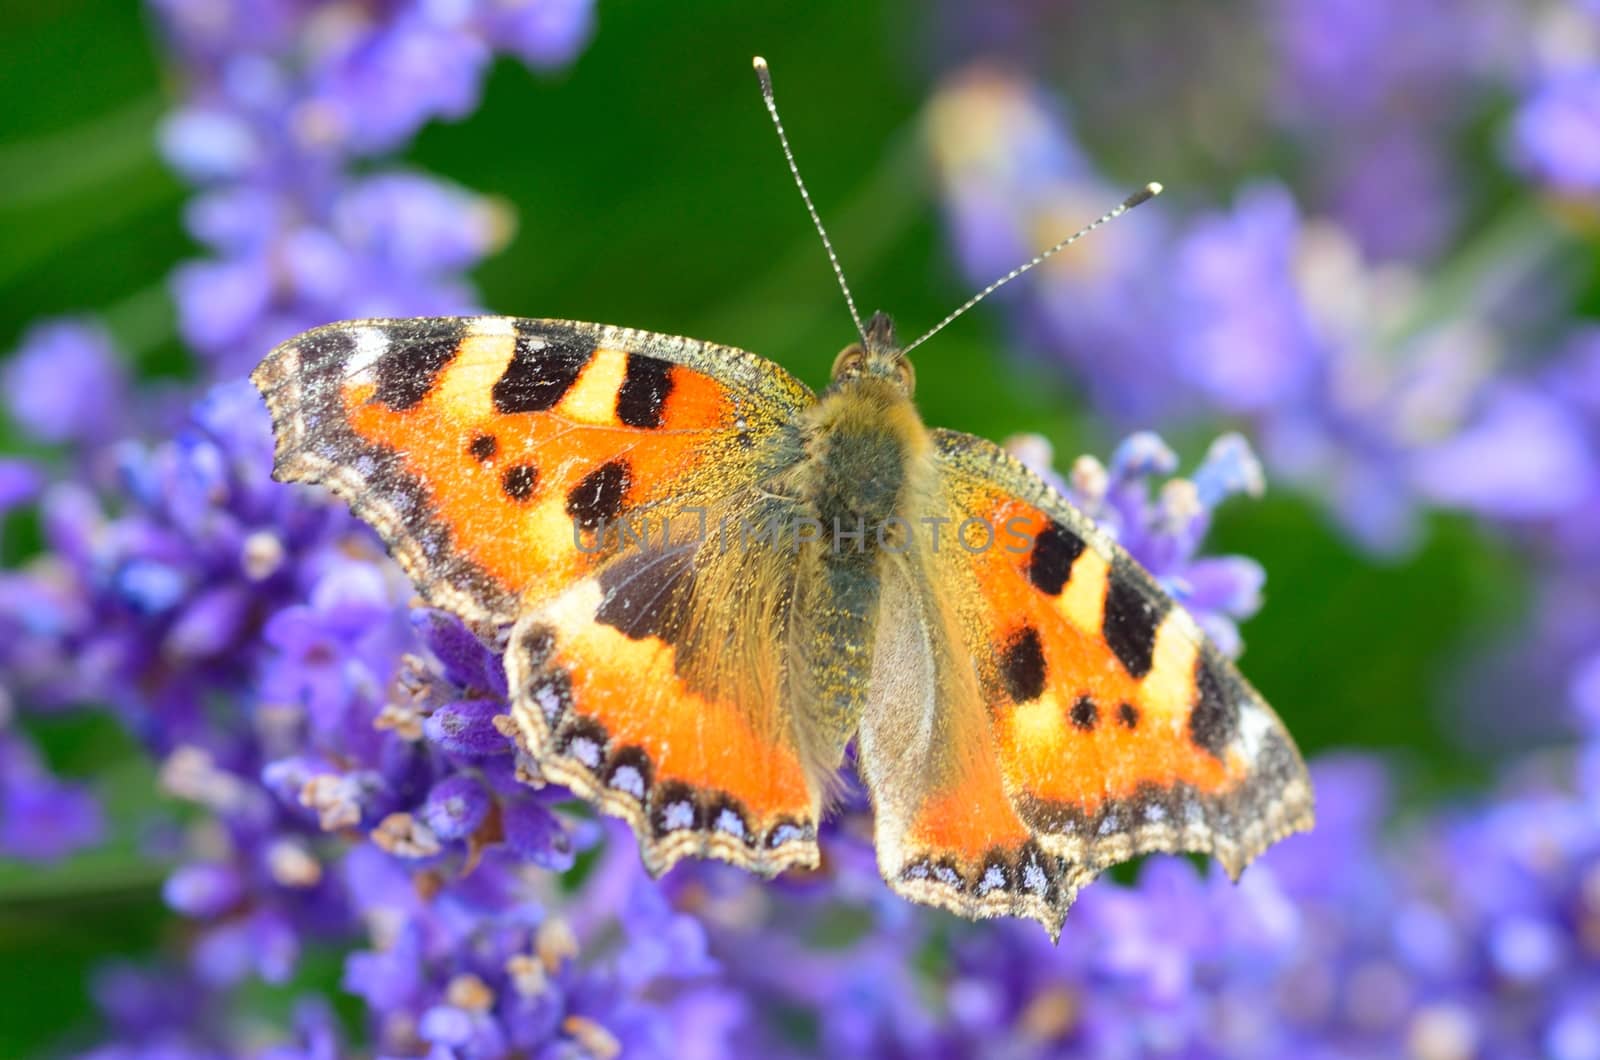 Painted lady butterfly on lavender  by pauws99